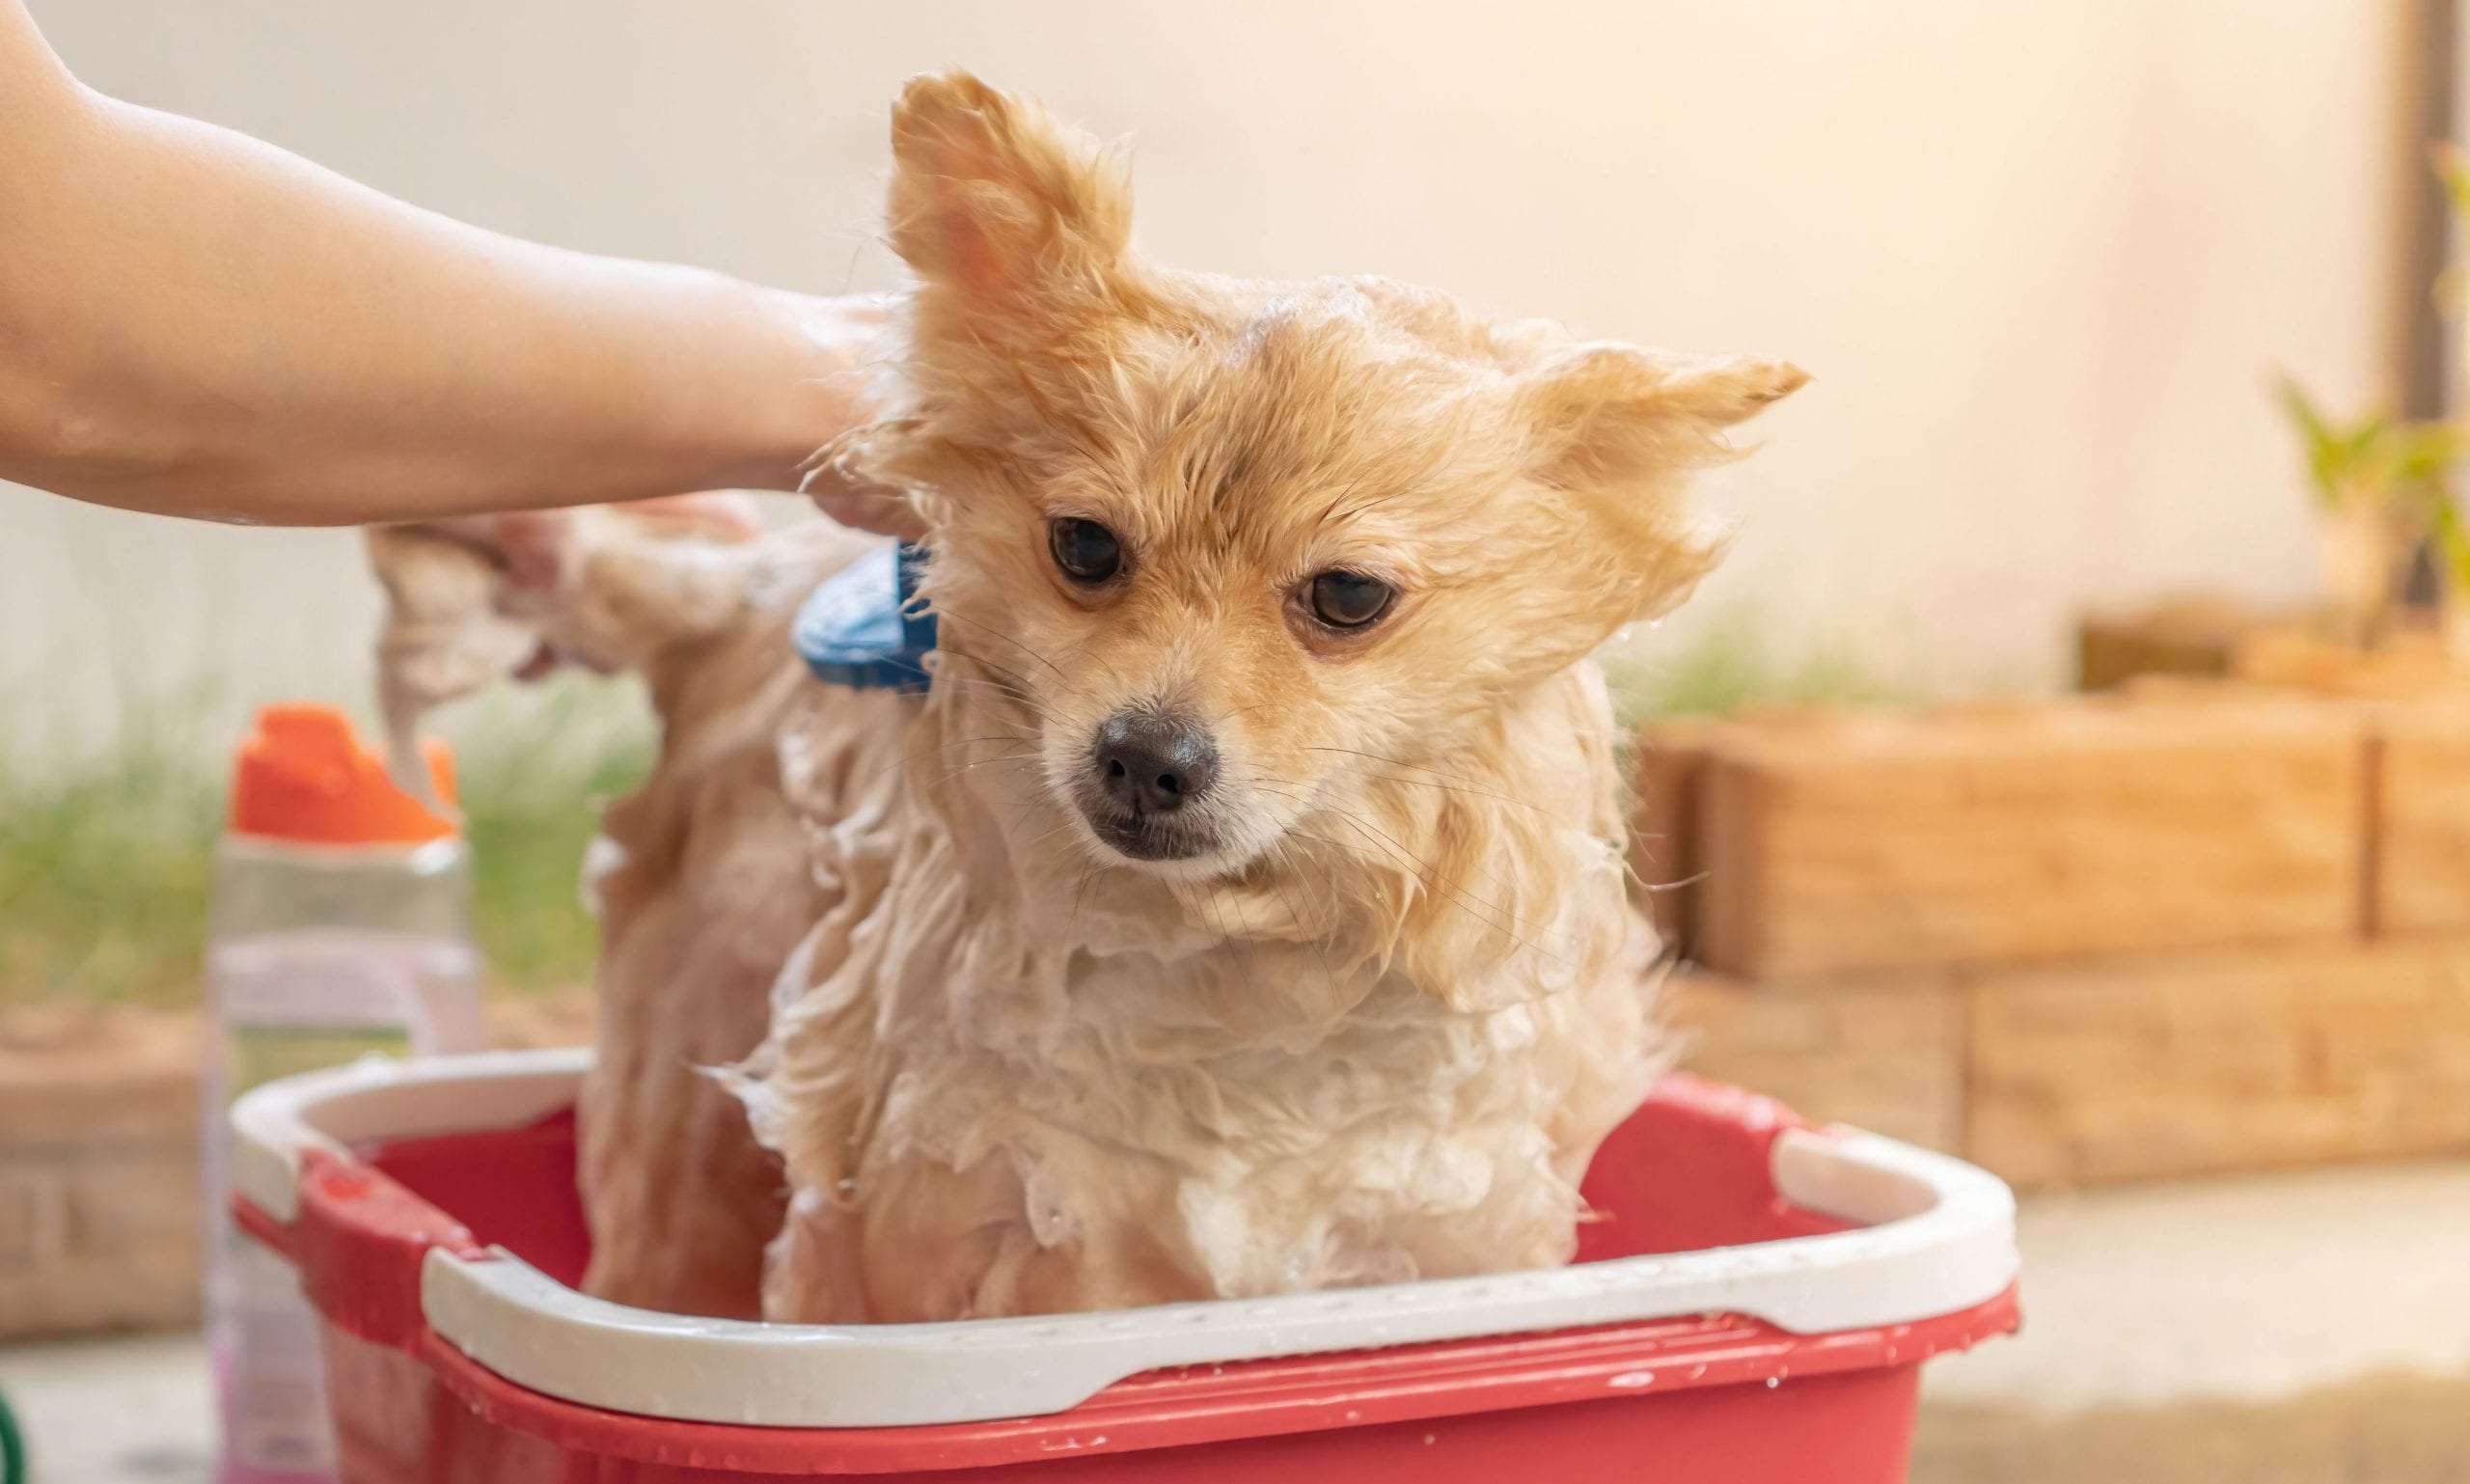 dog grooming mistakes: giving daily baths